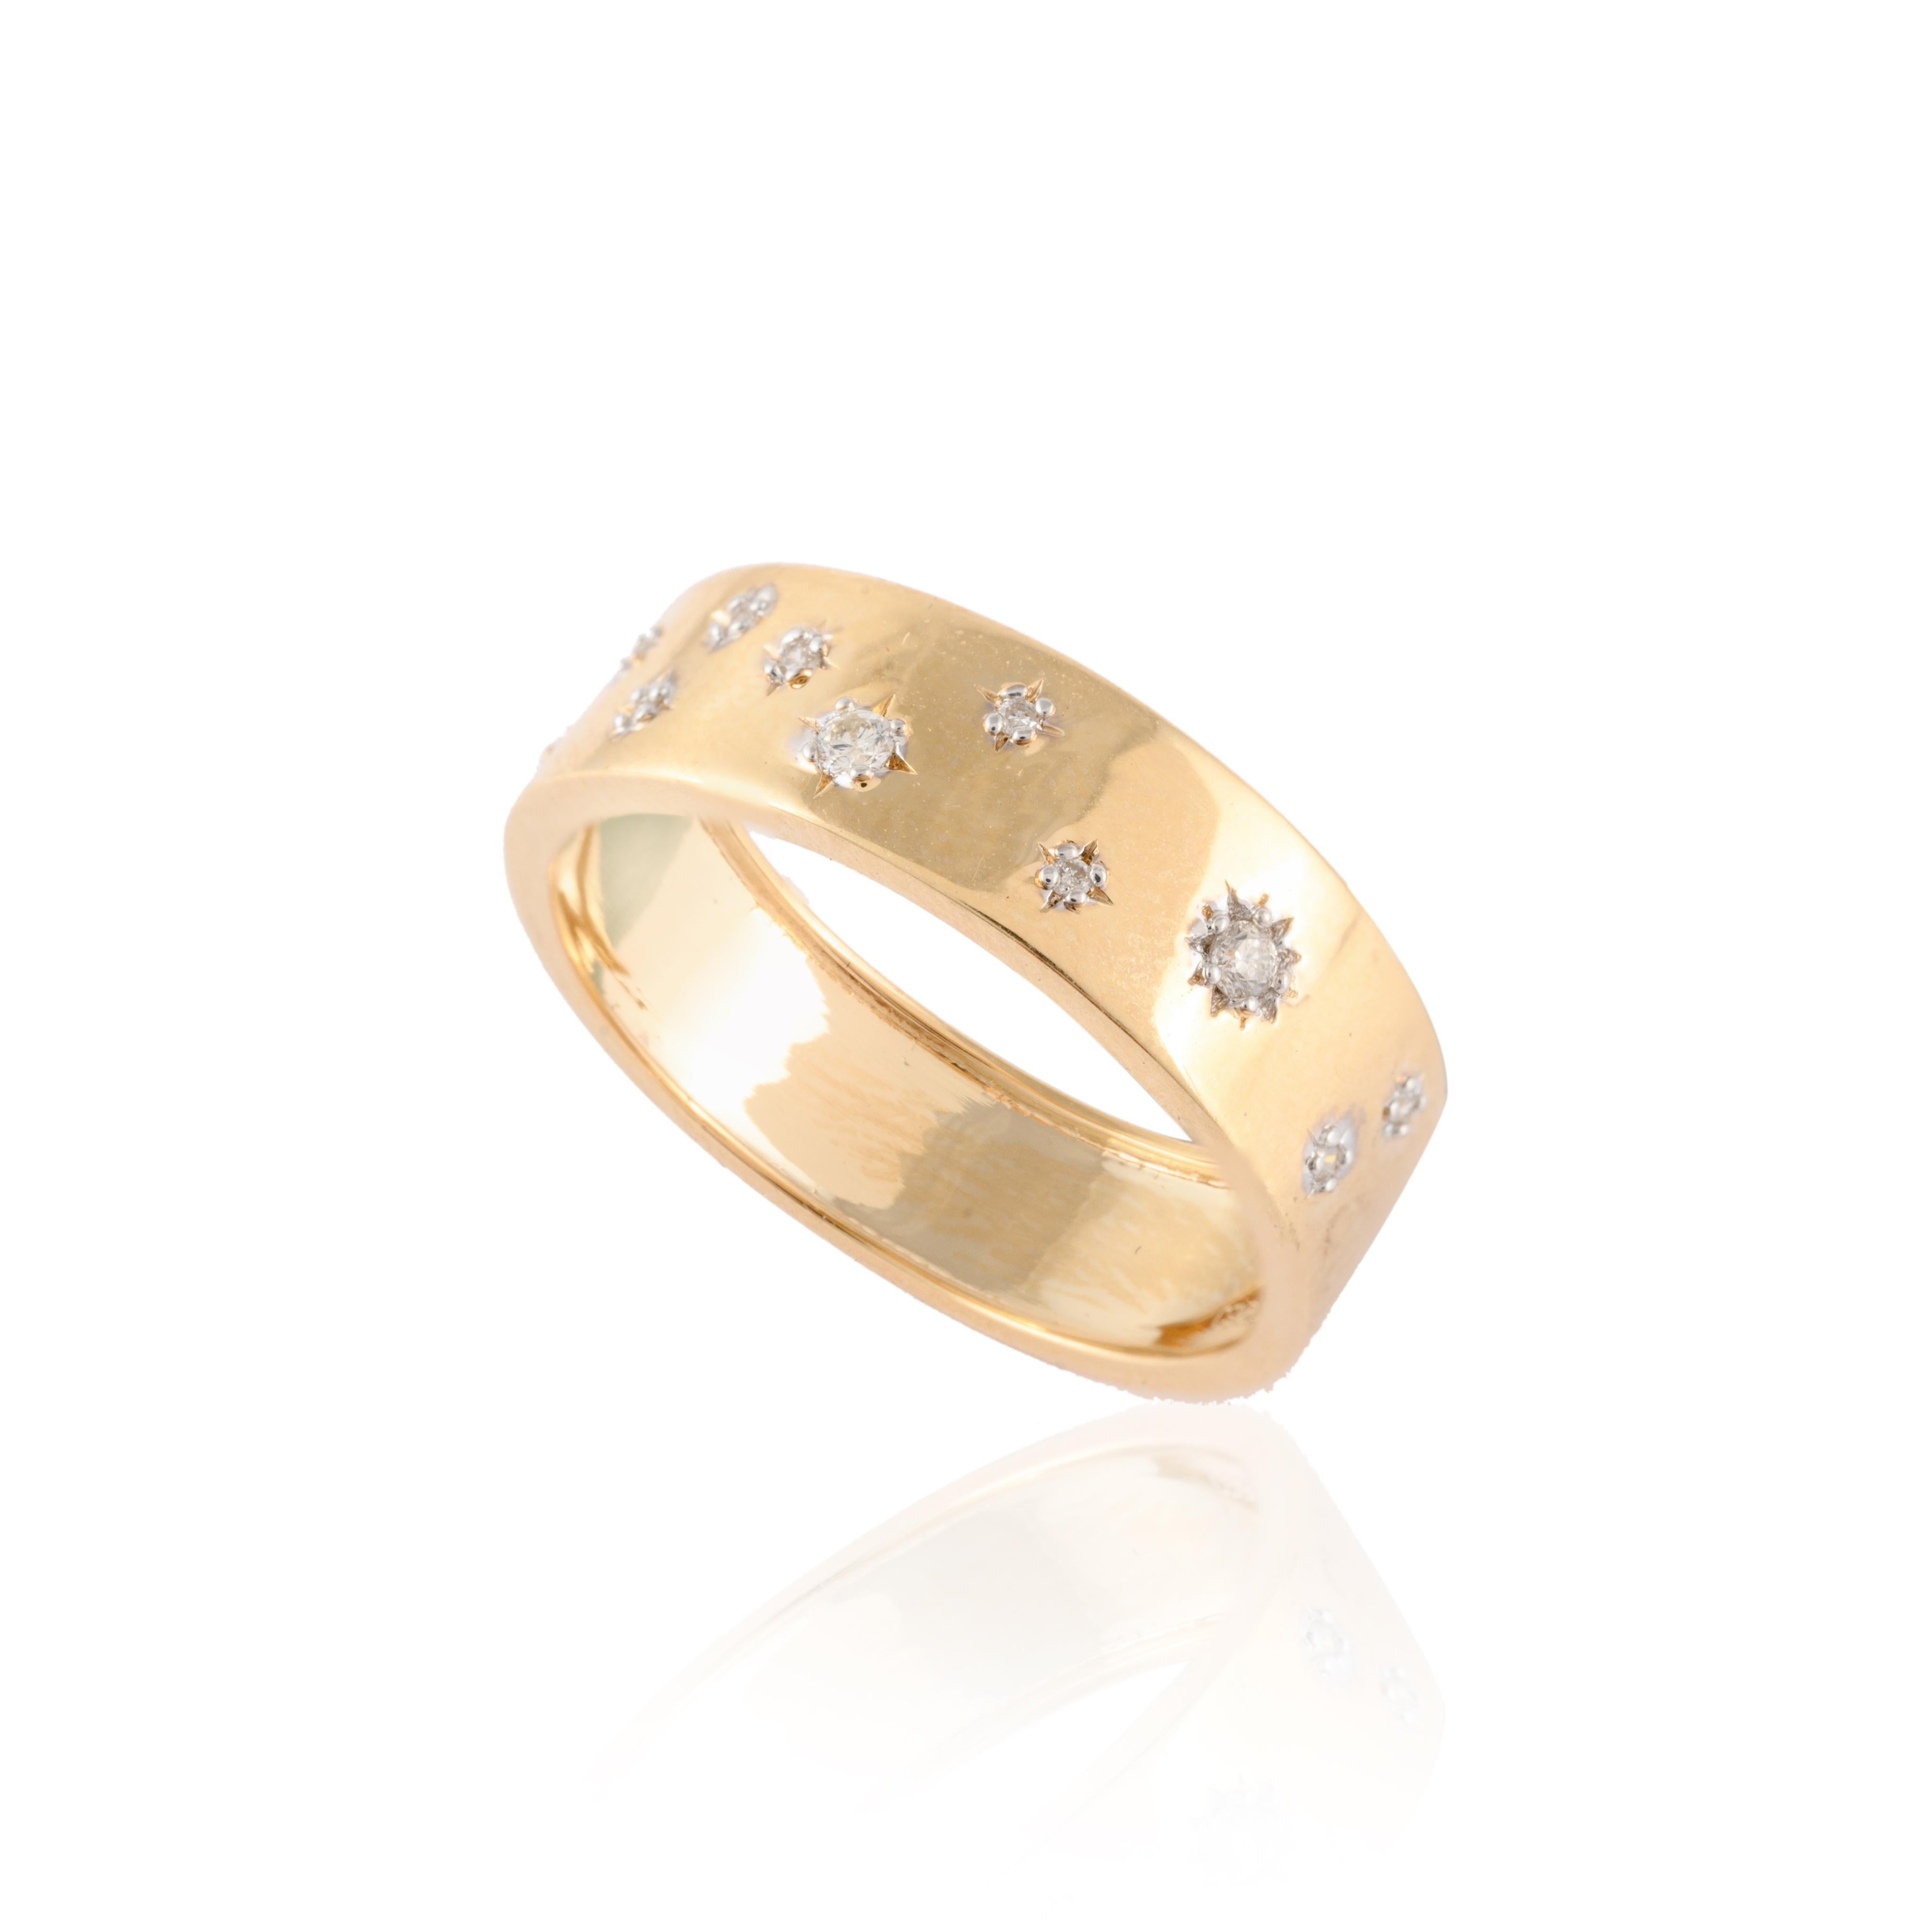 For Sale:  Genuine Diamond Stardust Astral Unisex Band Ring in 18k Solid Yellow Gold 5